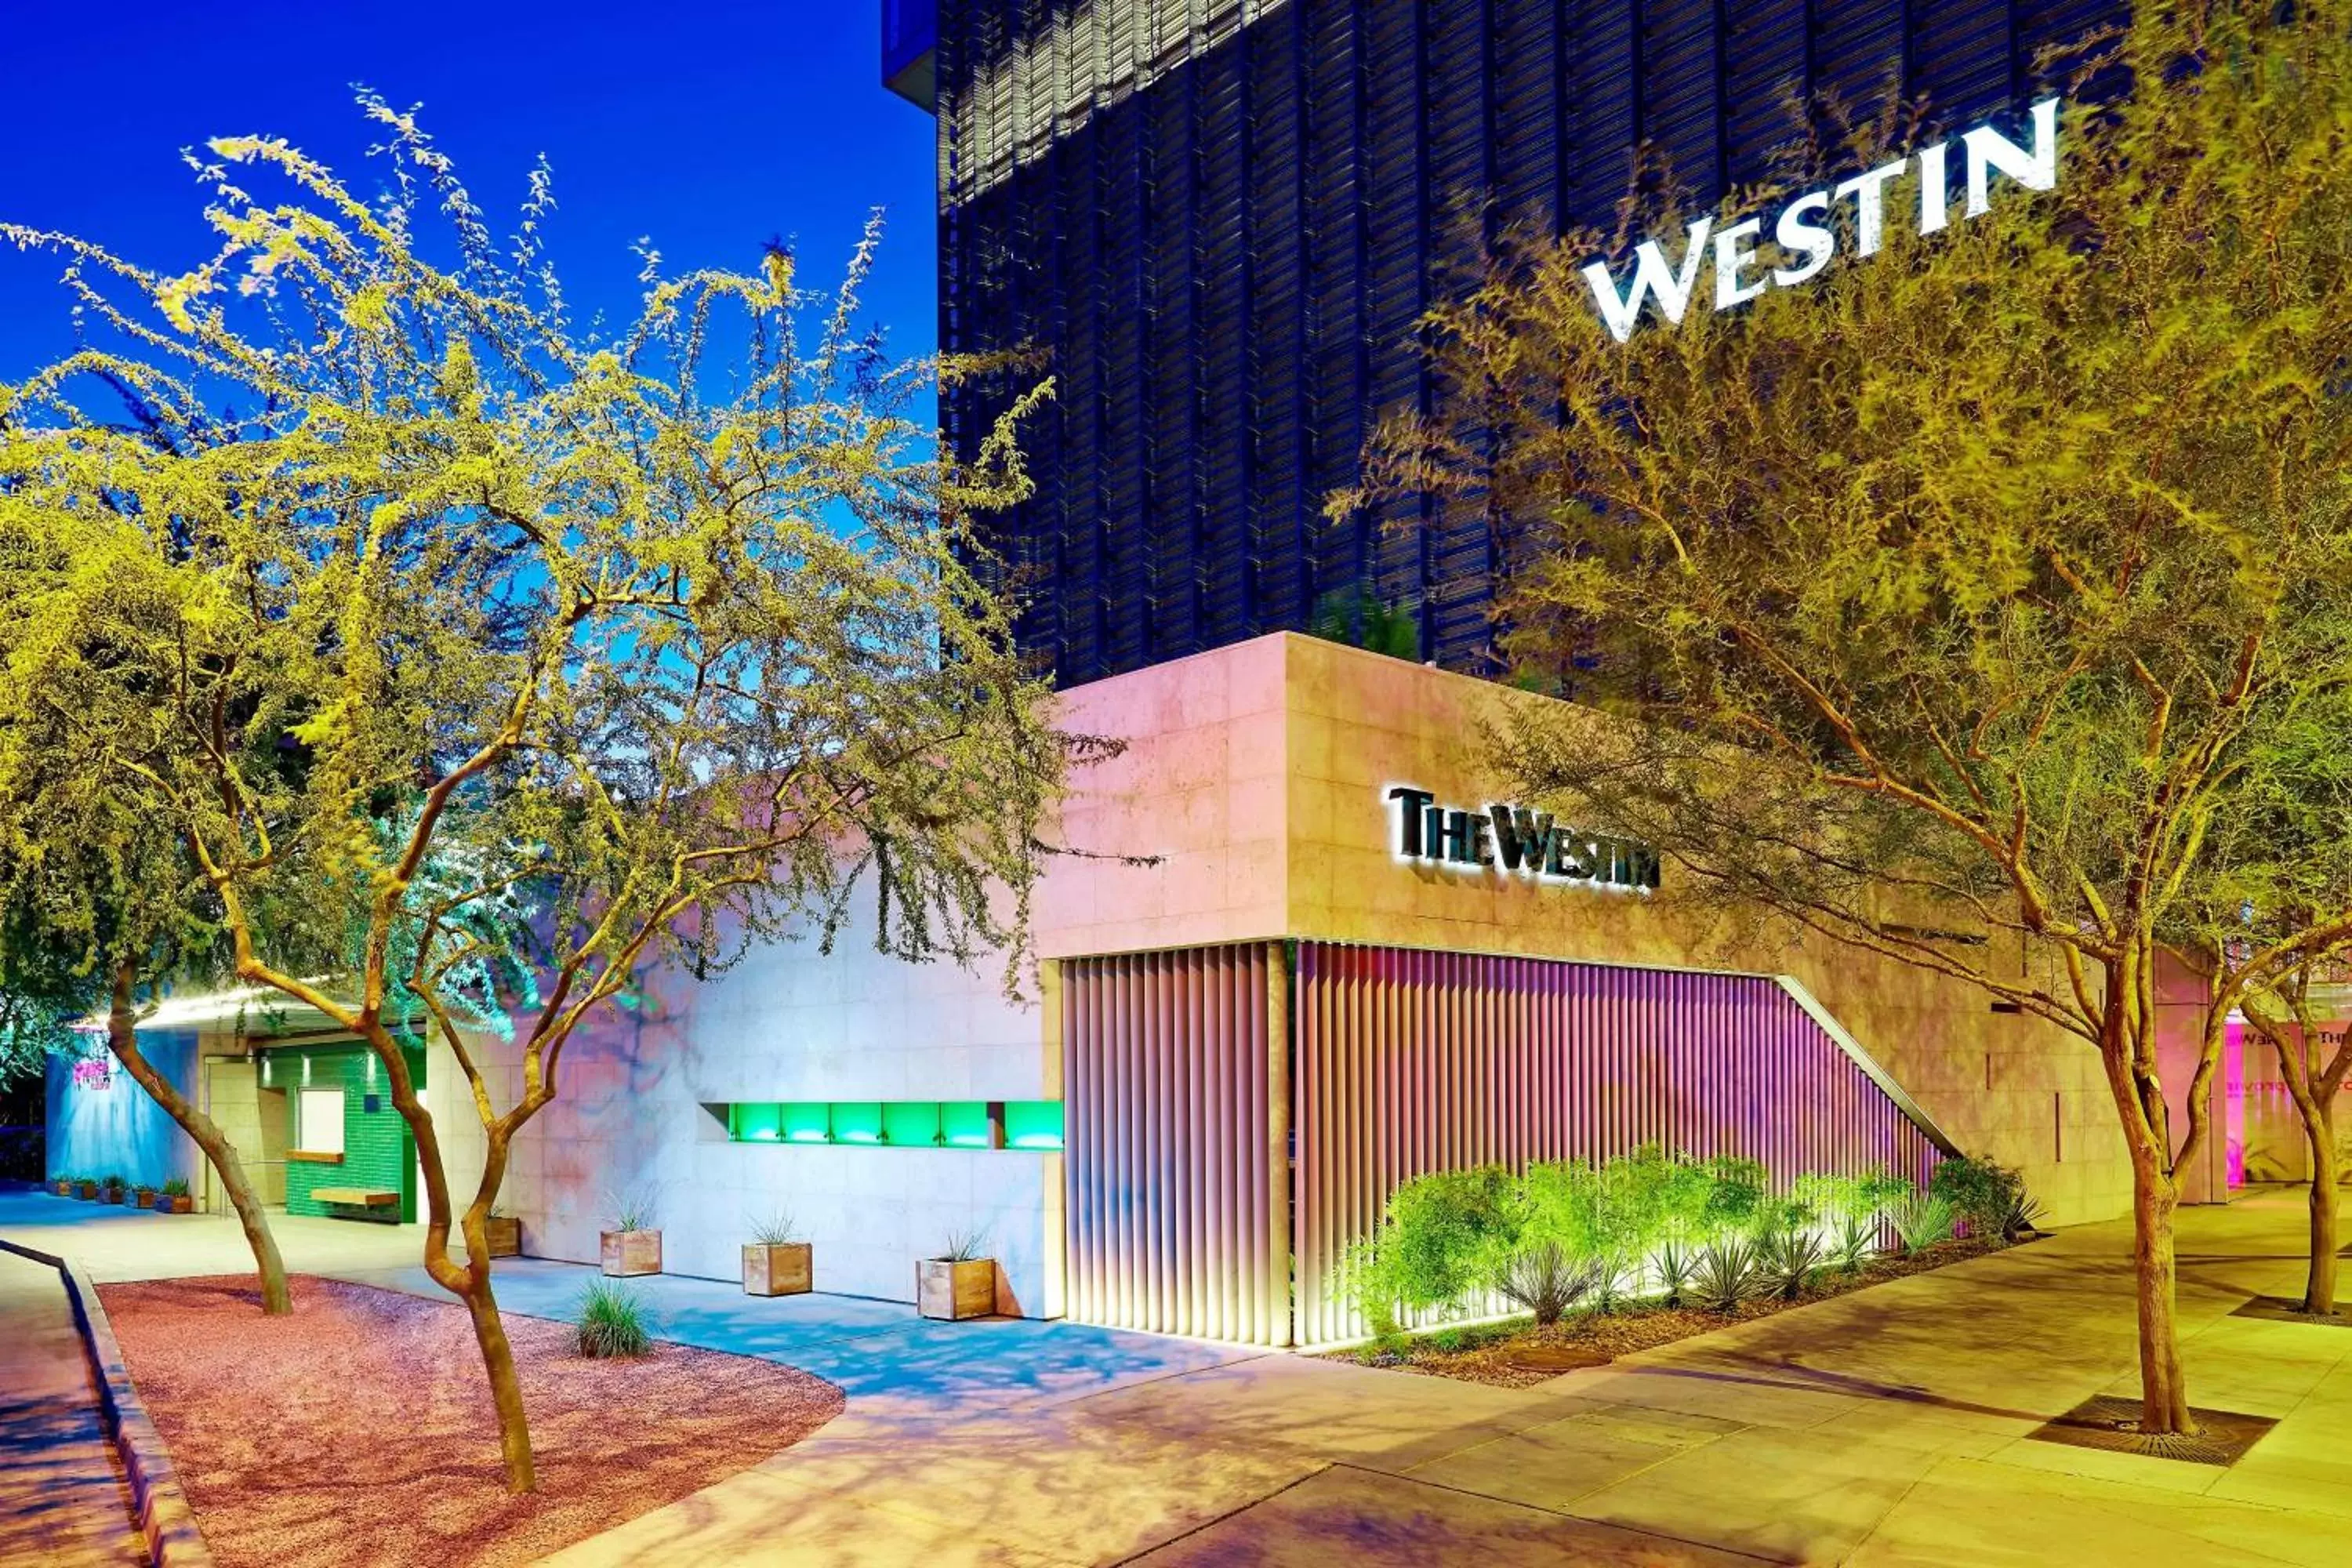 Property Building in The Westin Phoenix Downtown